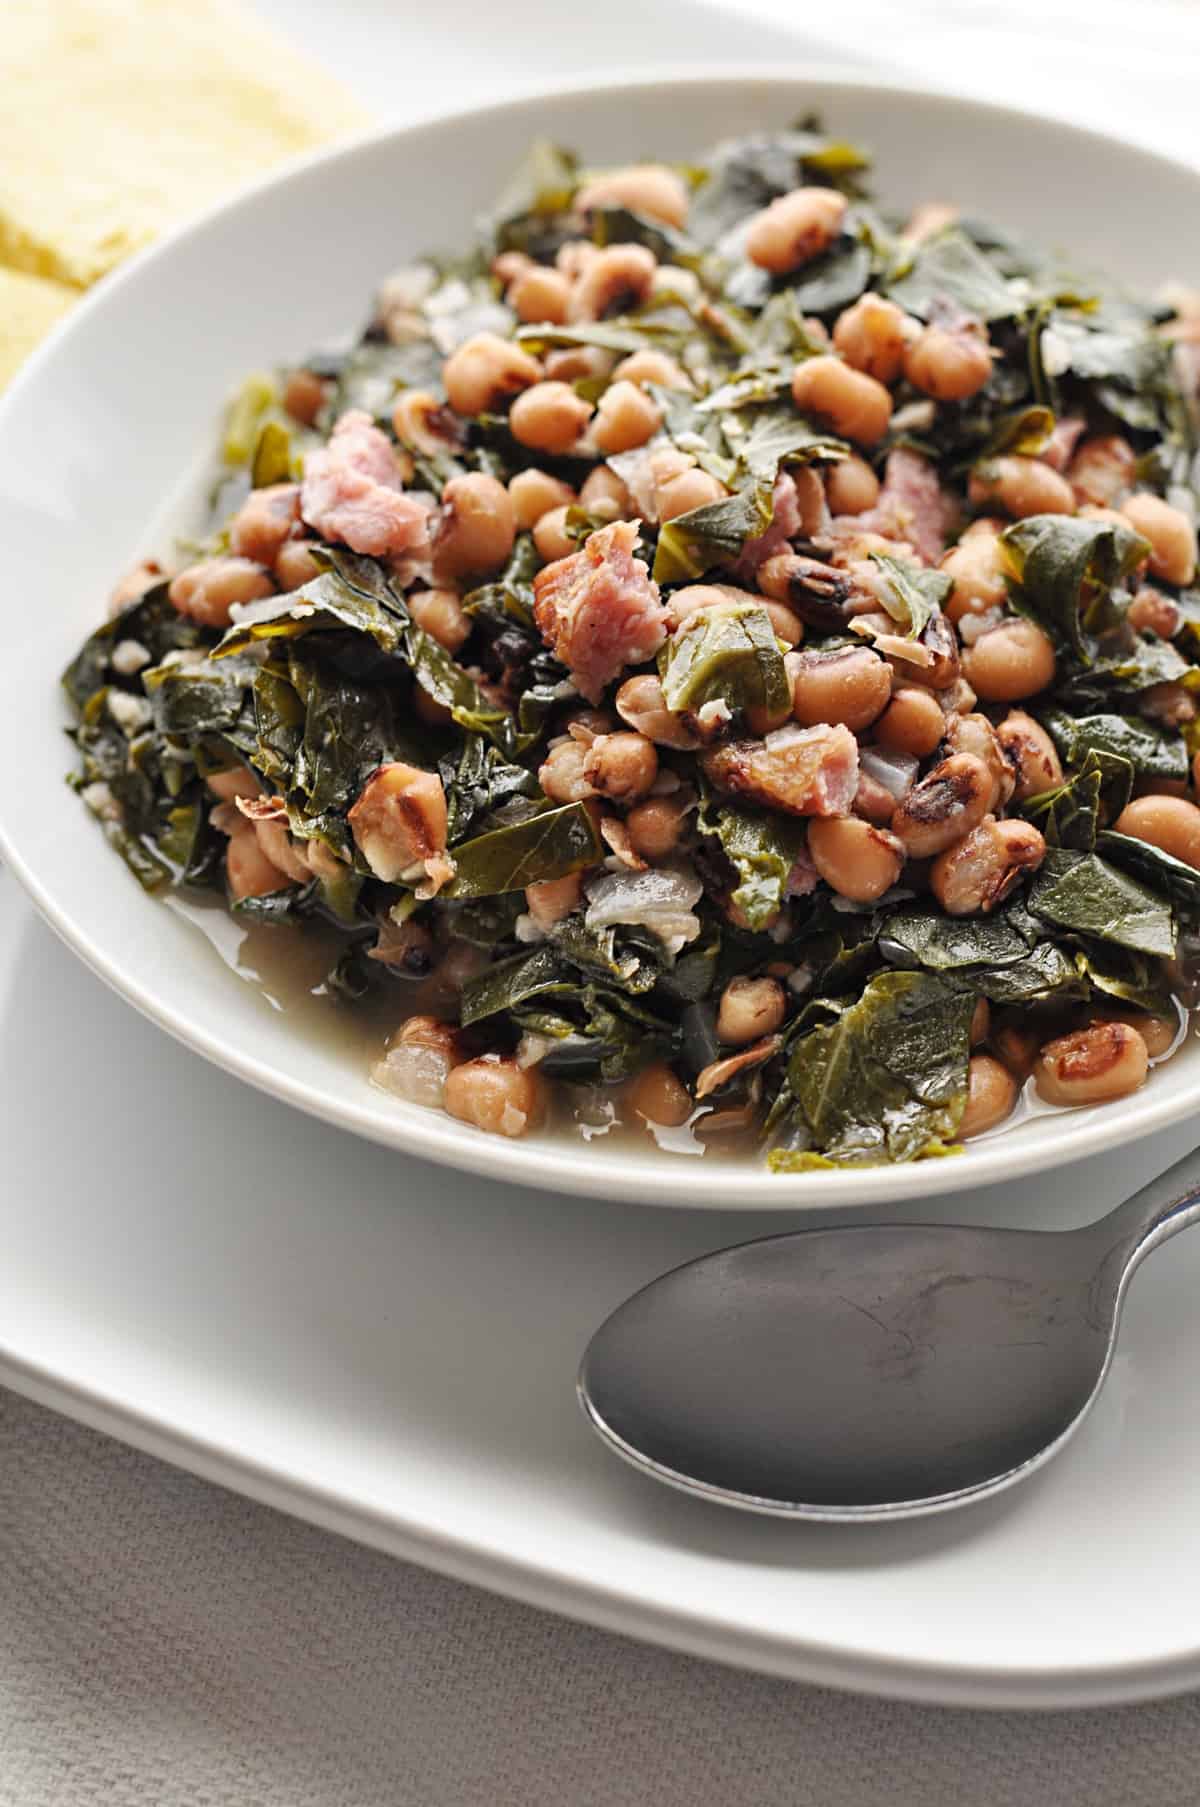 Southern Black Eyed Peas and Collard Greens - Savory With Soul